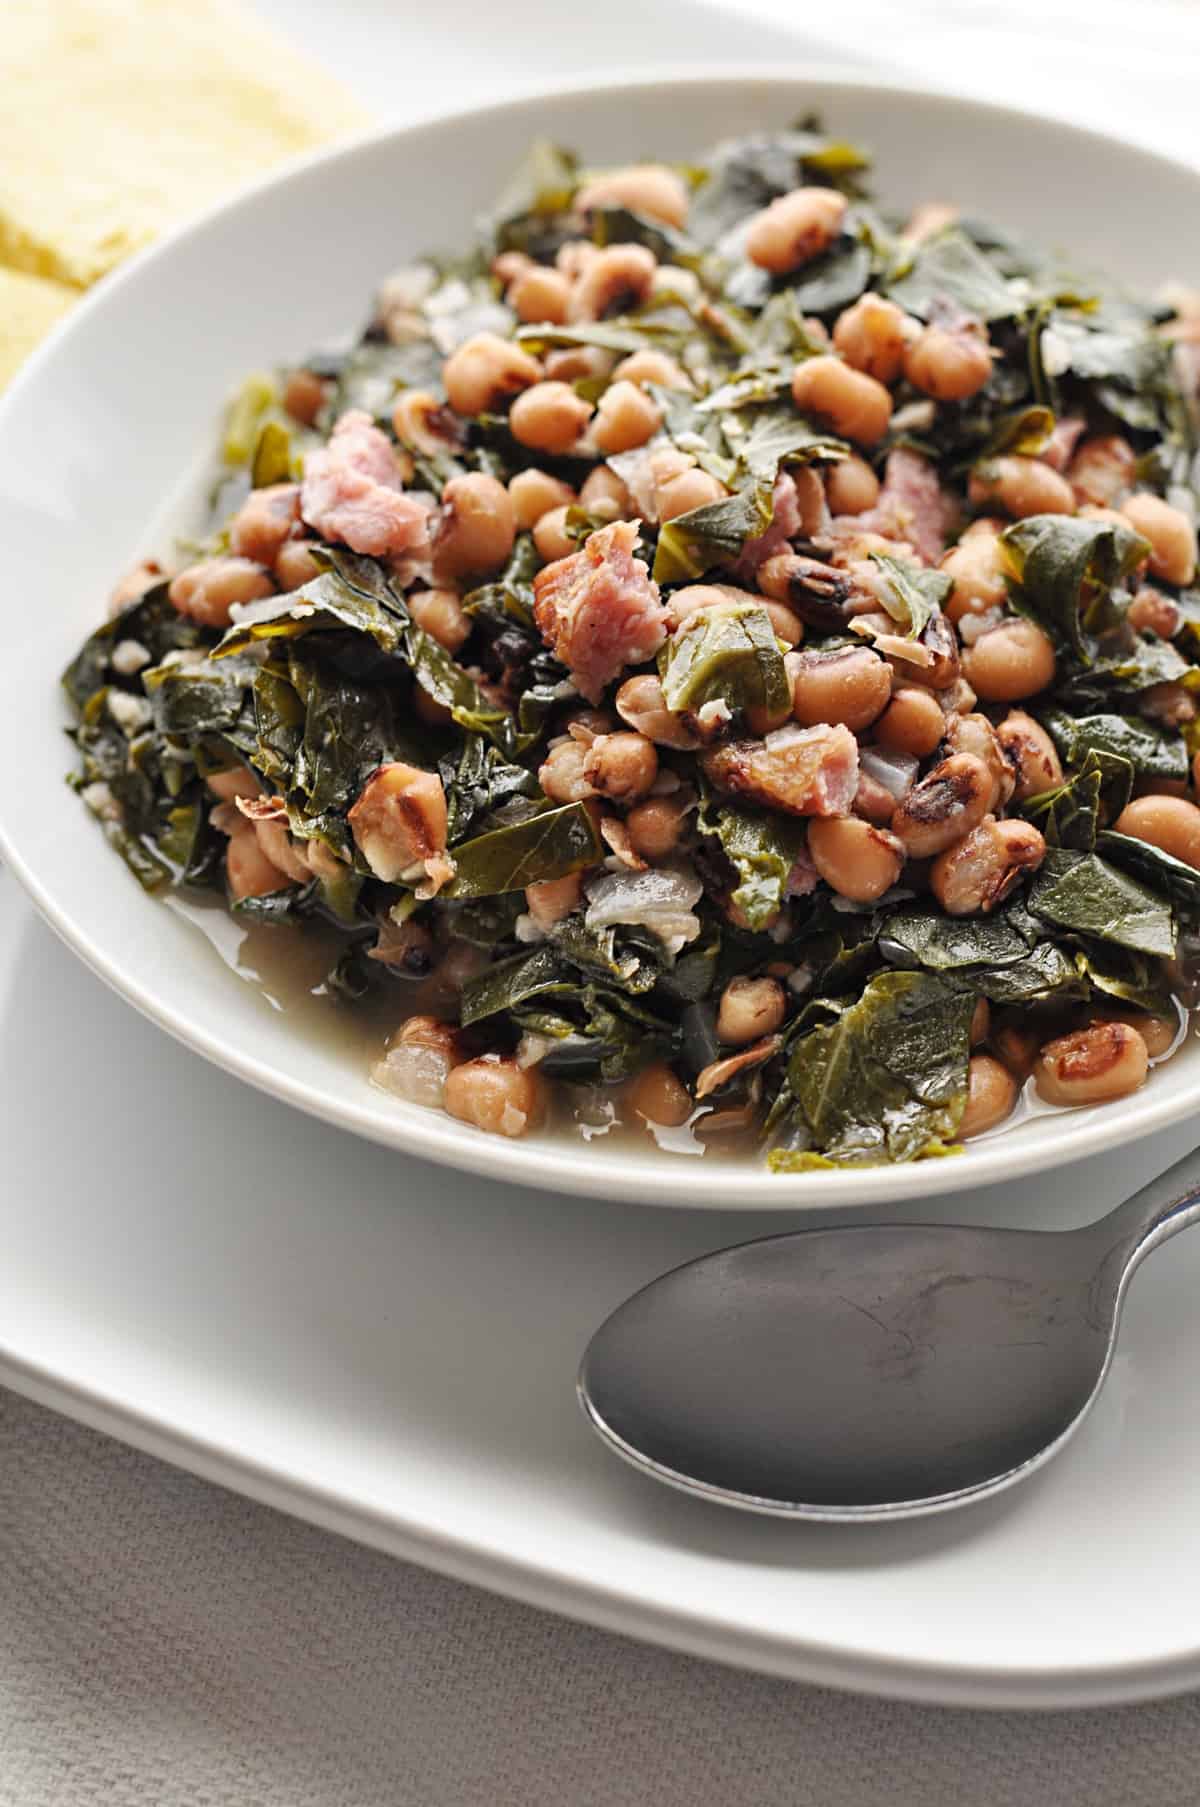 Southern Black Eyed Peas and Collard Greens - Savory With Soul